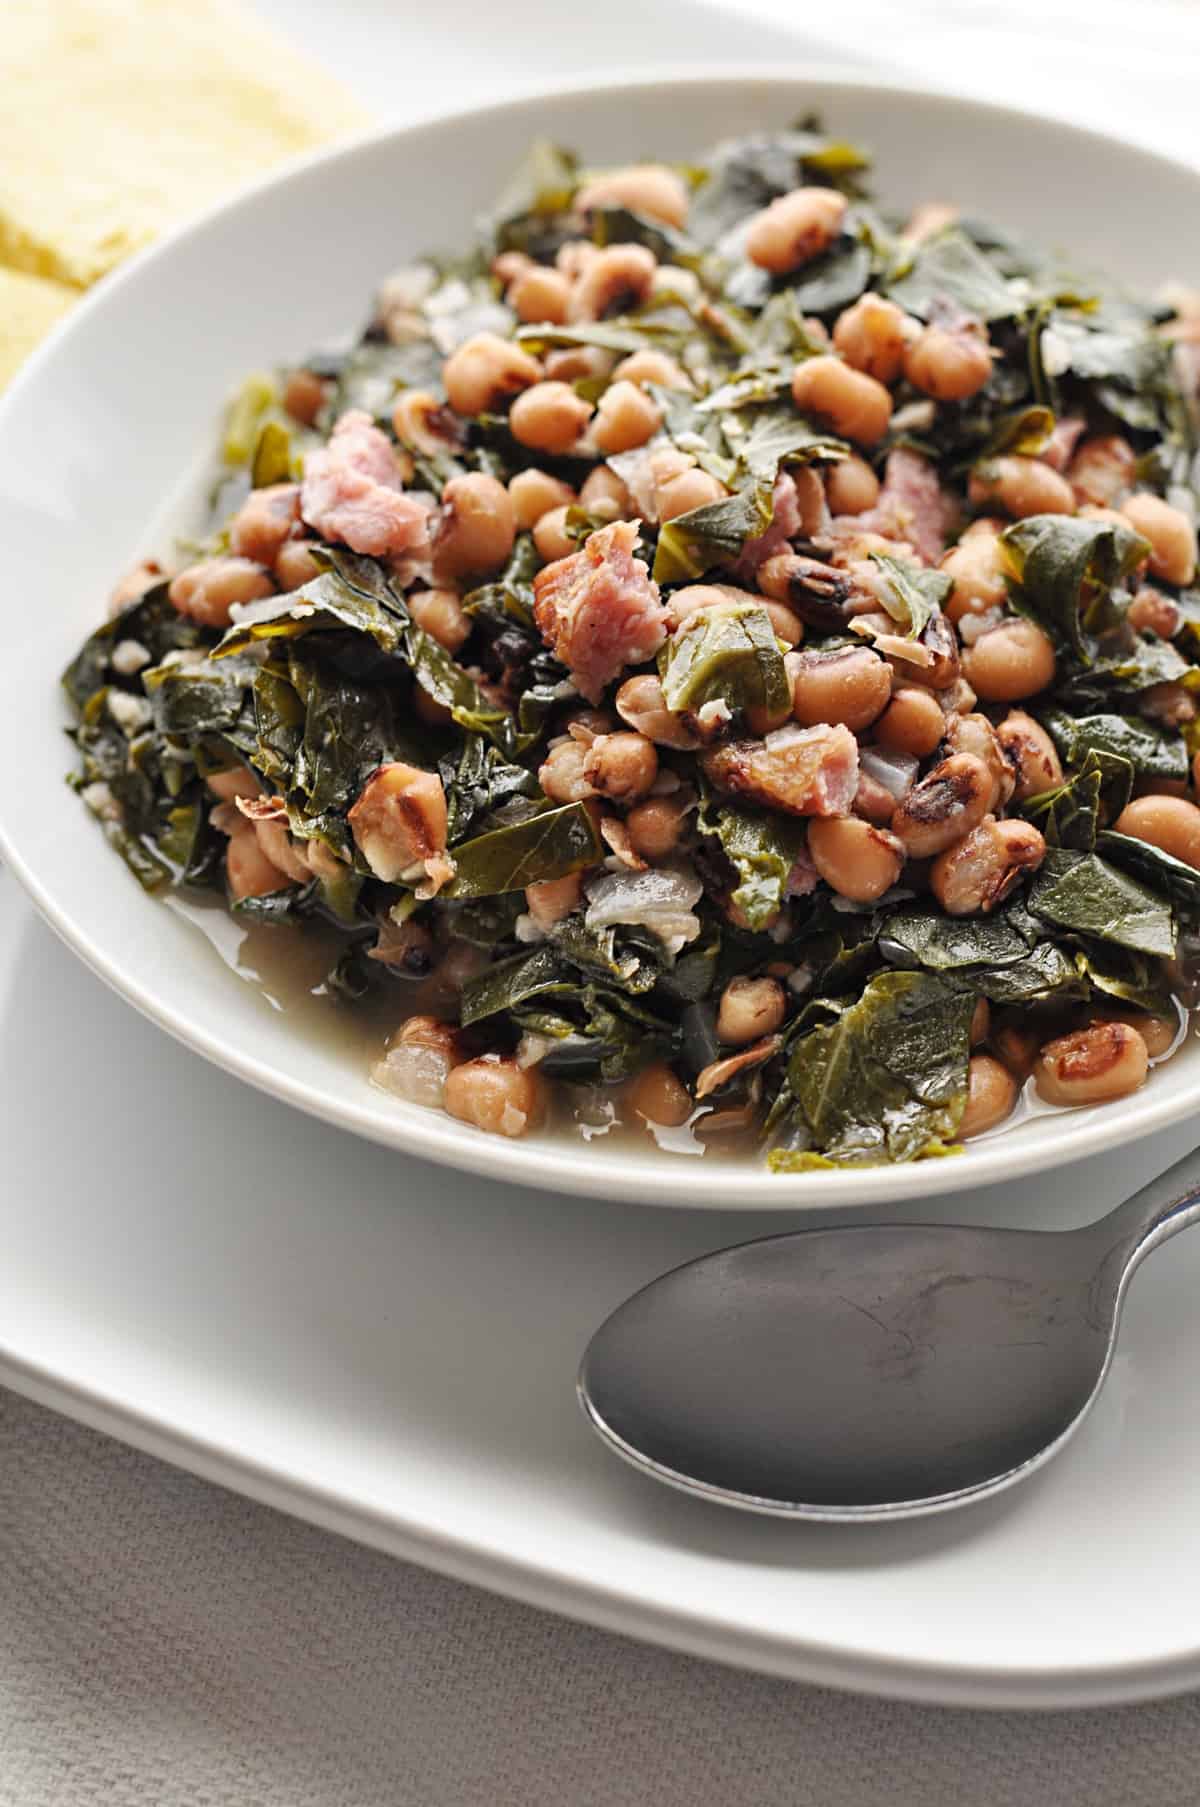 Southern Black Eyed Peas and Collard Greens - Savory With Soul